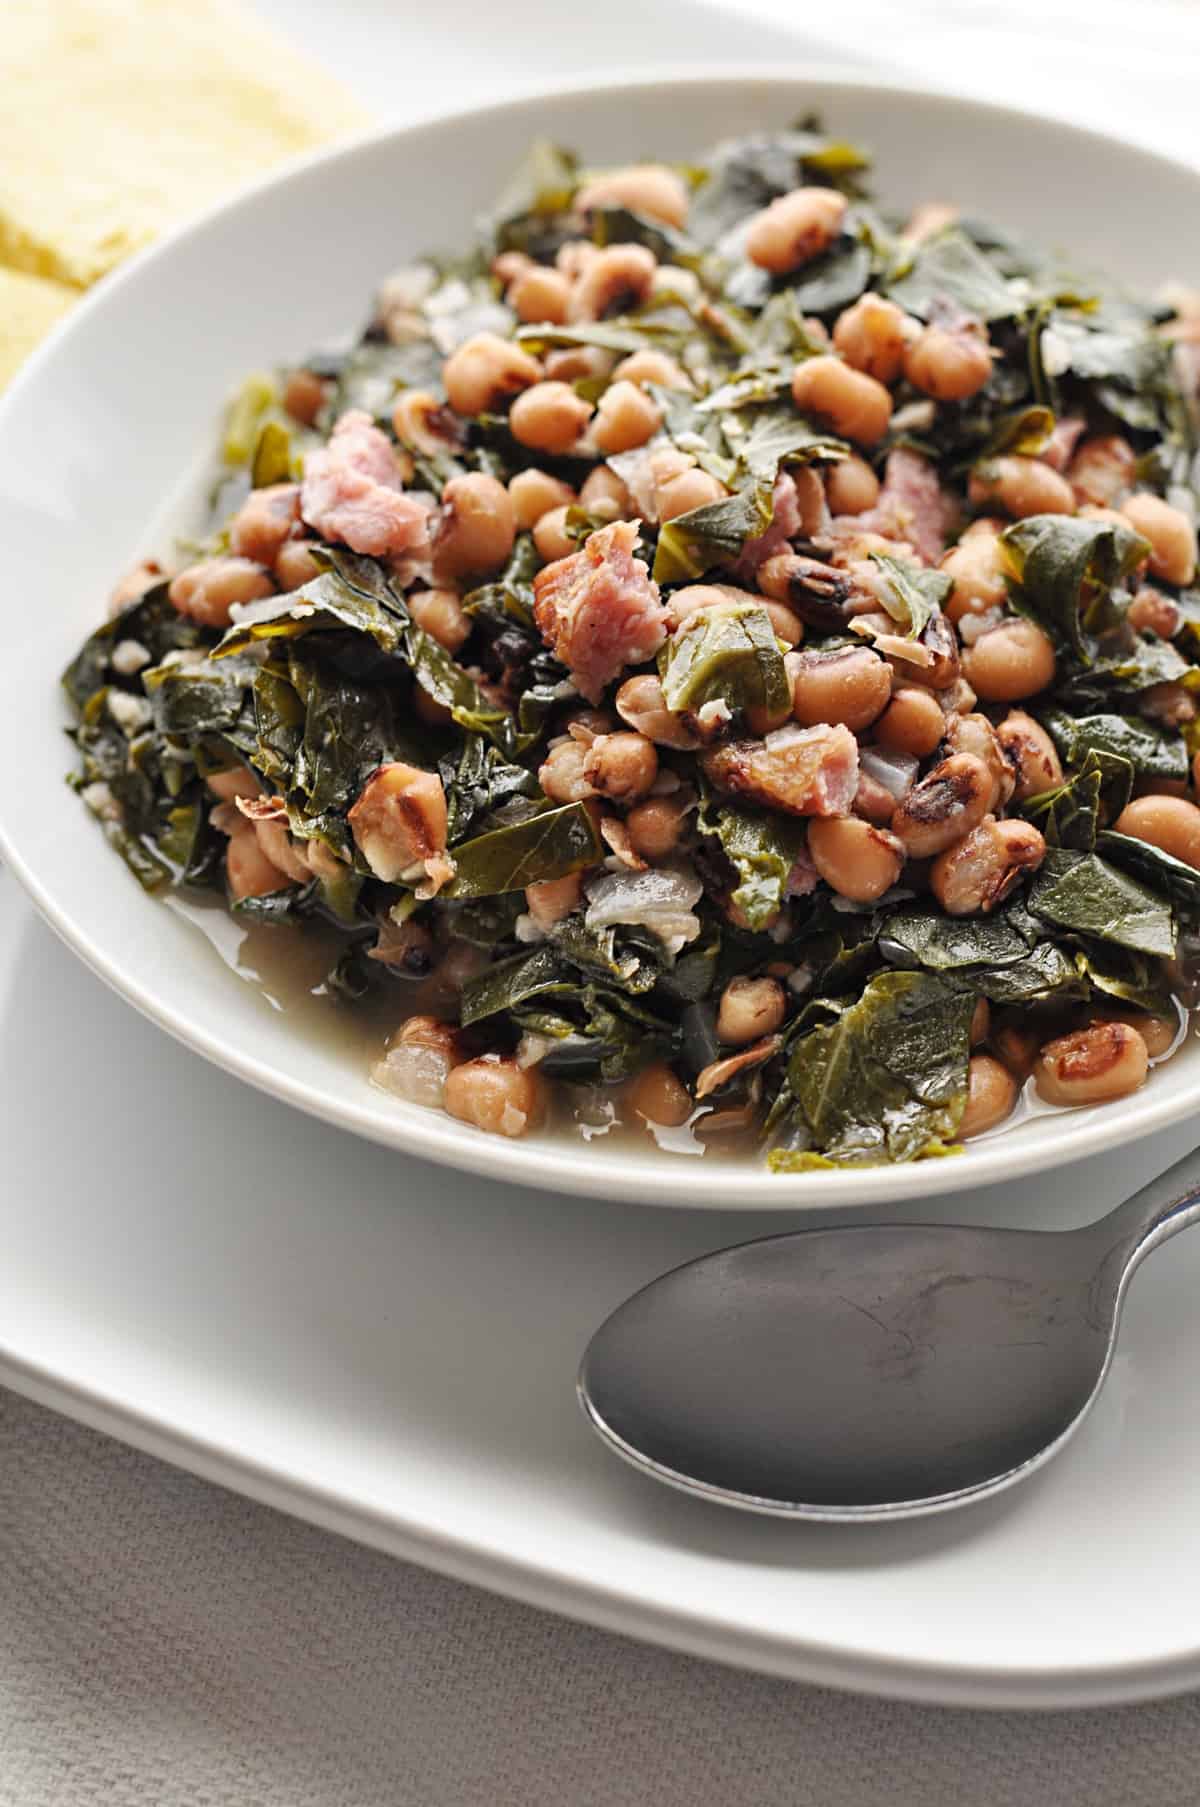 Southern Black Eyed Peas and Collard Greens - Savory With Soul